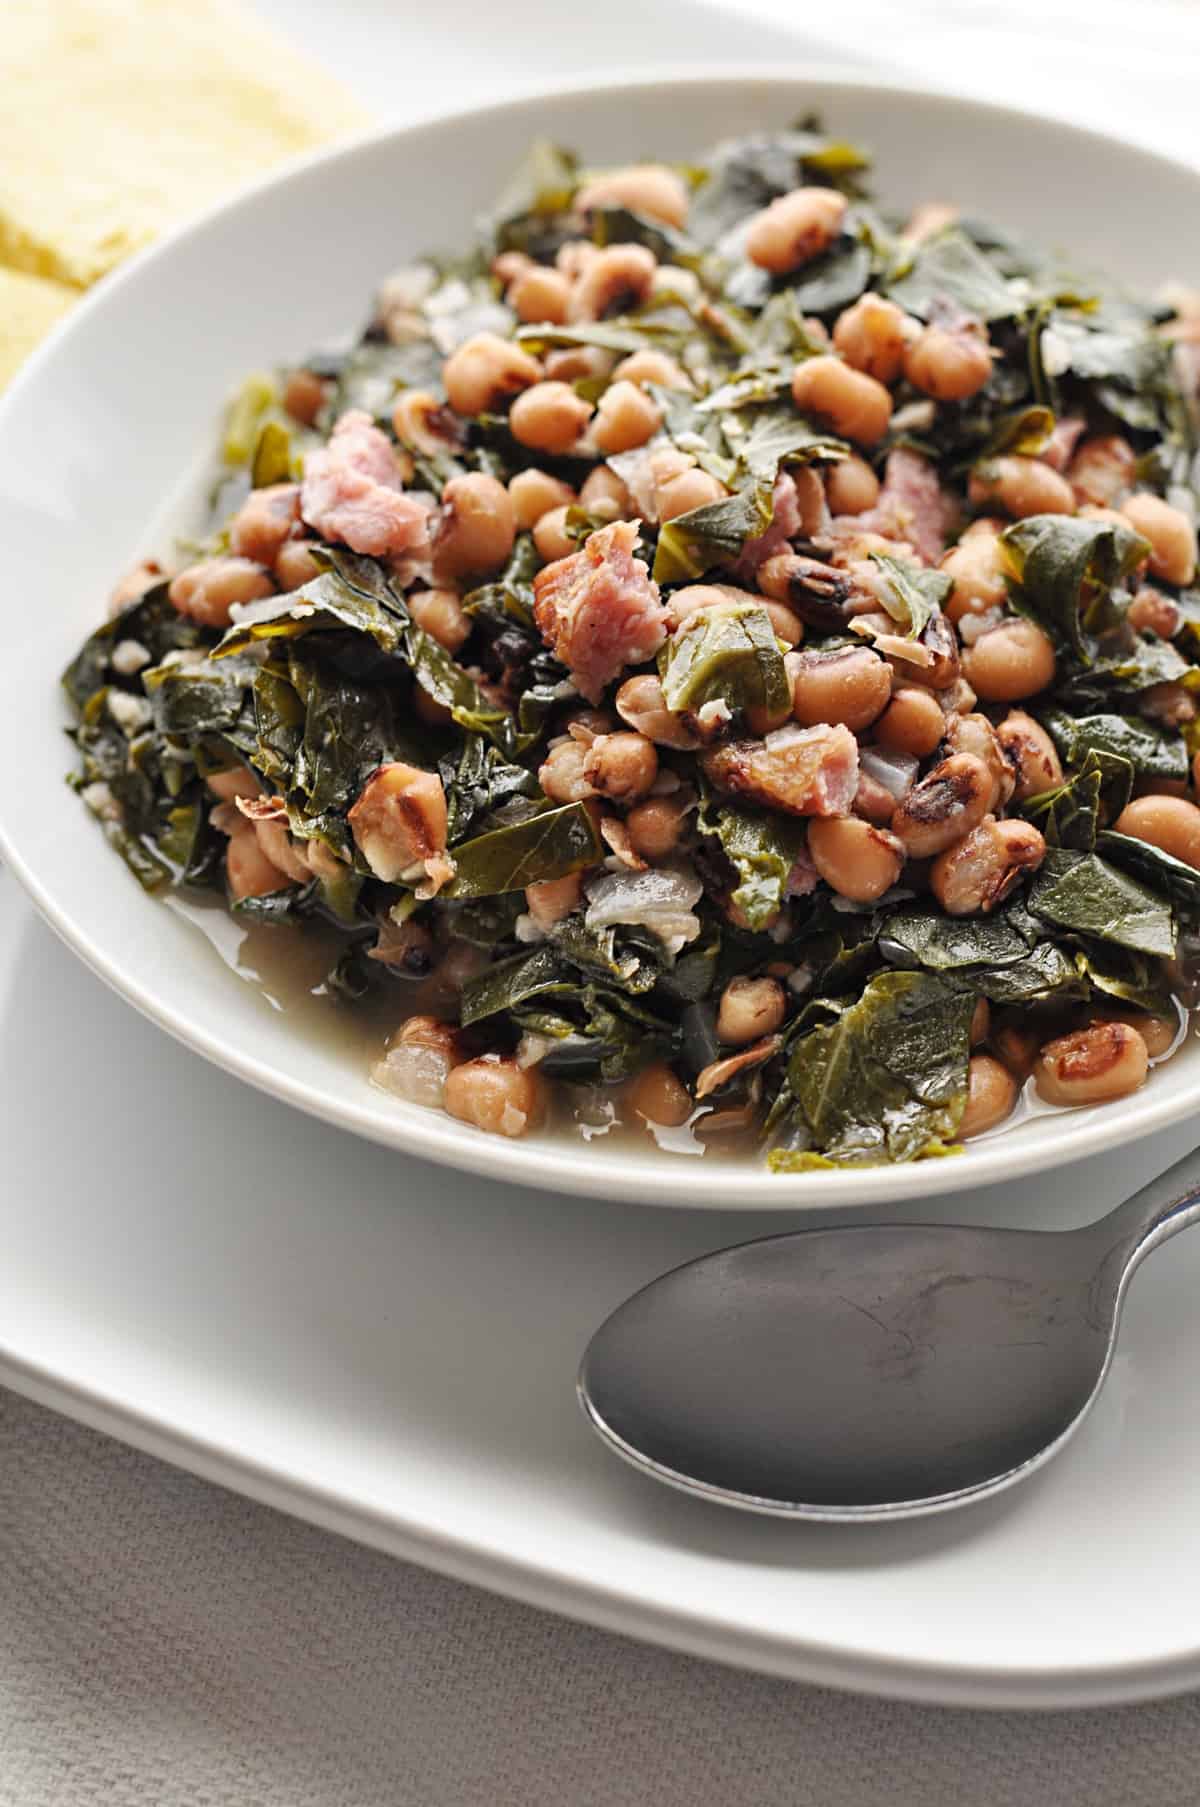 Southern Black Eyed Peas and Collard Greens - Savory With Soul